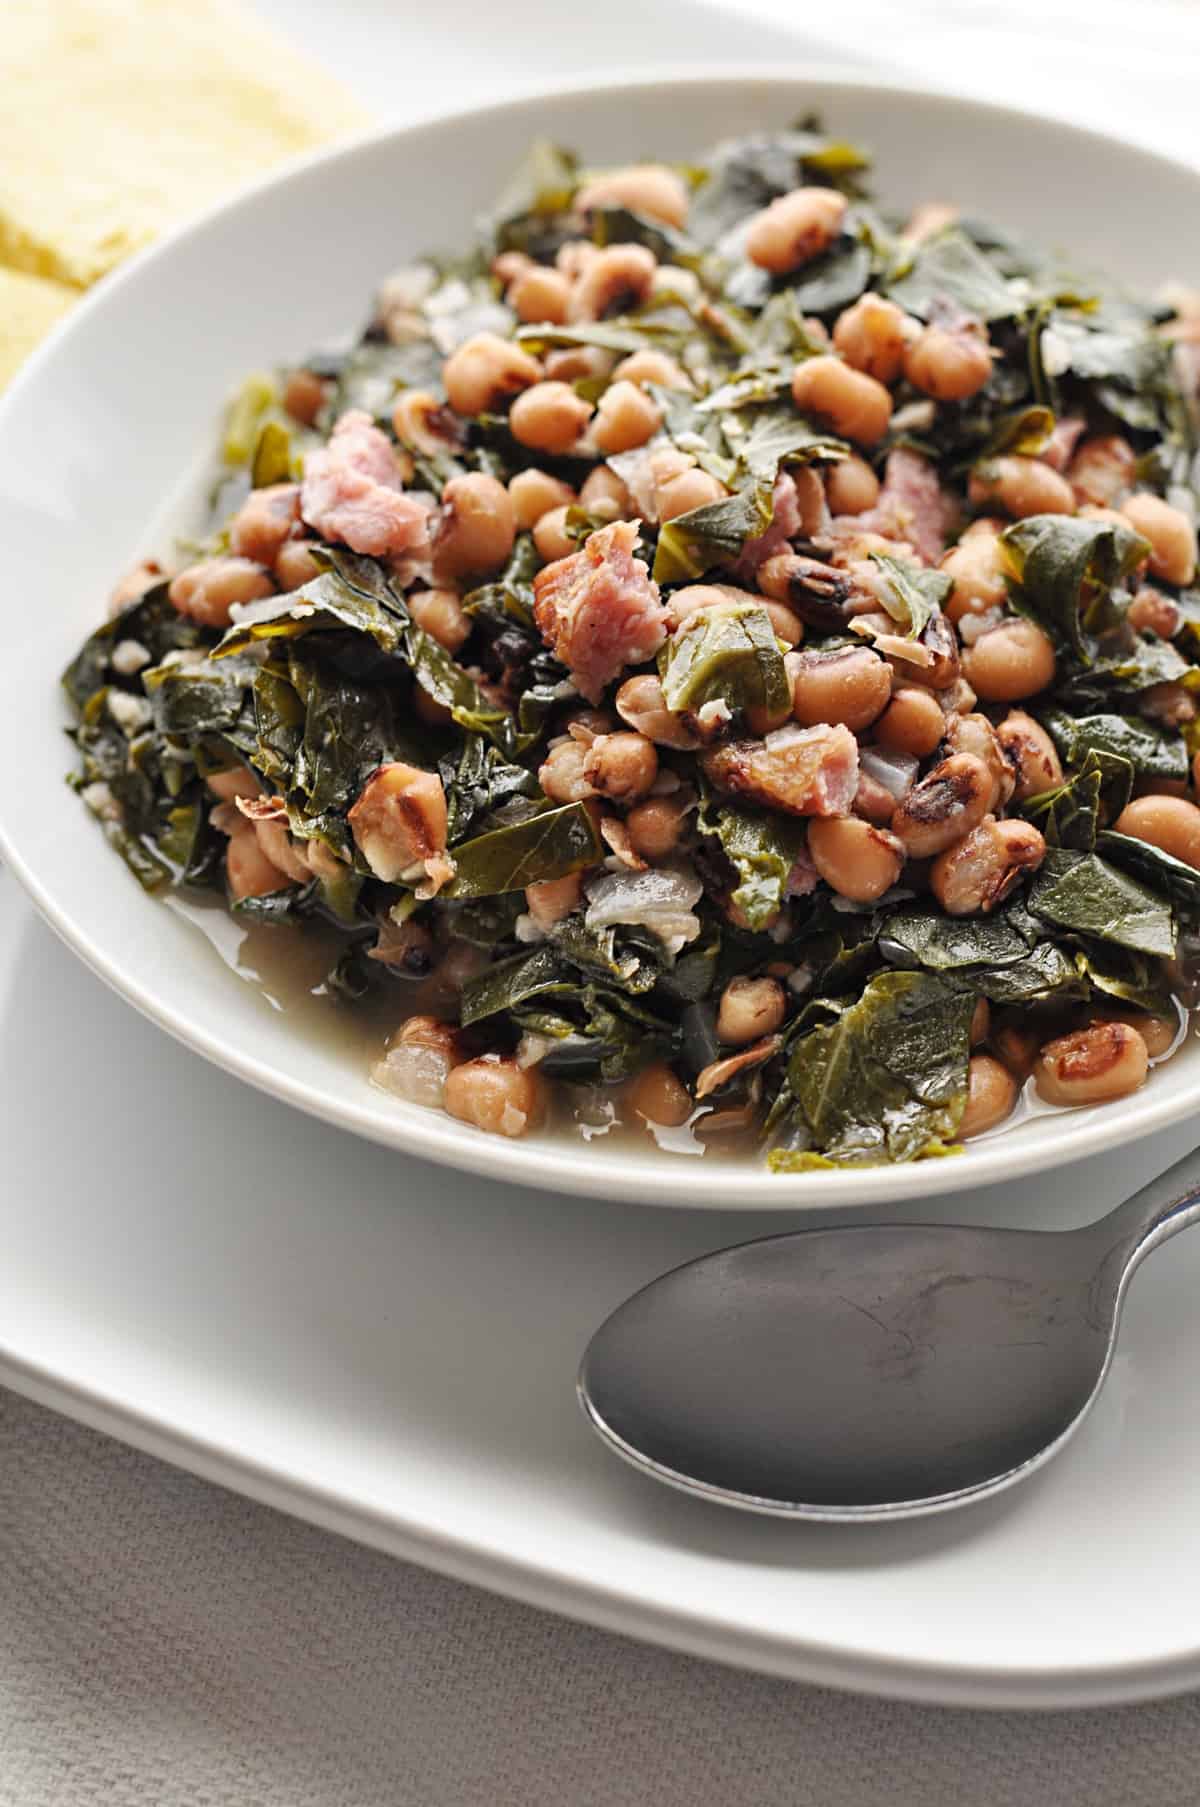 Southern Black Eyed Peas and Collard Greens - Savory With Soul